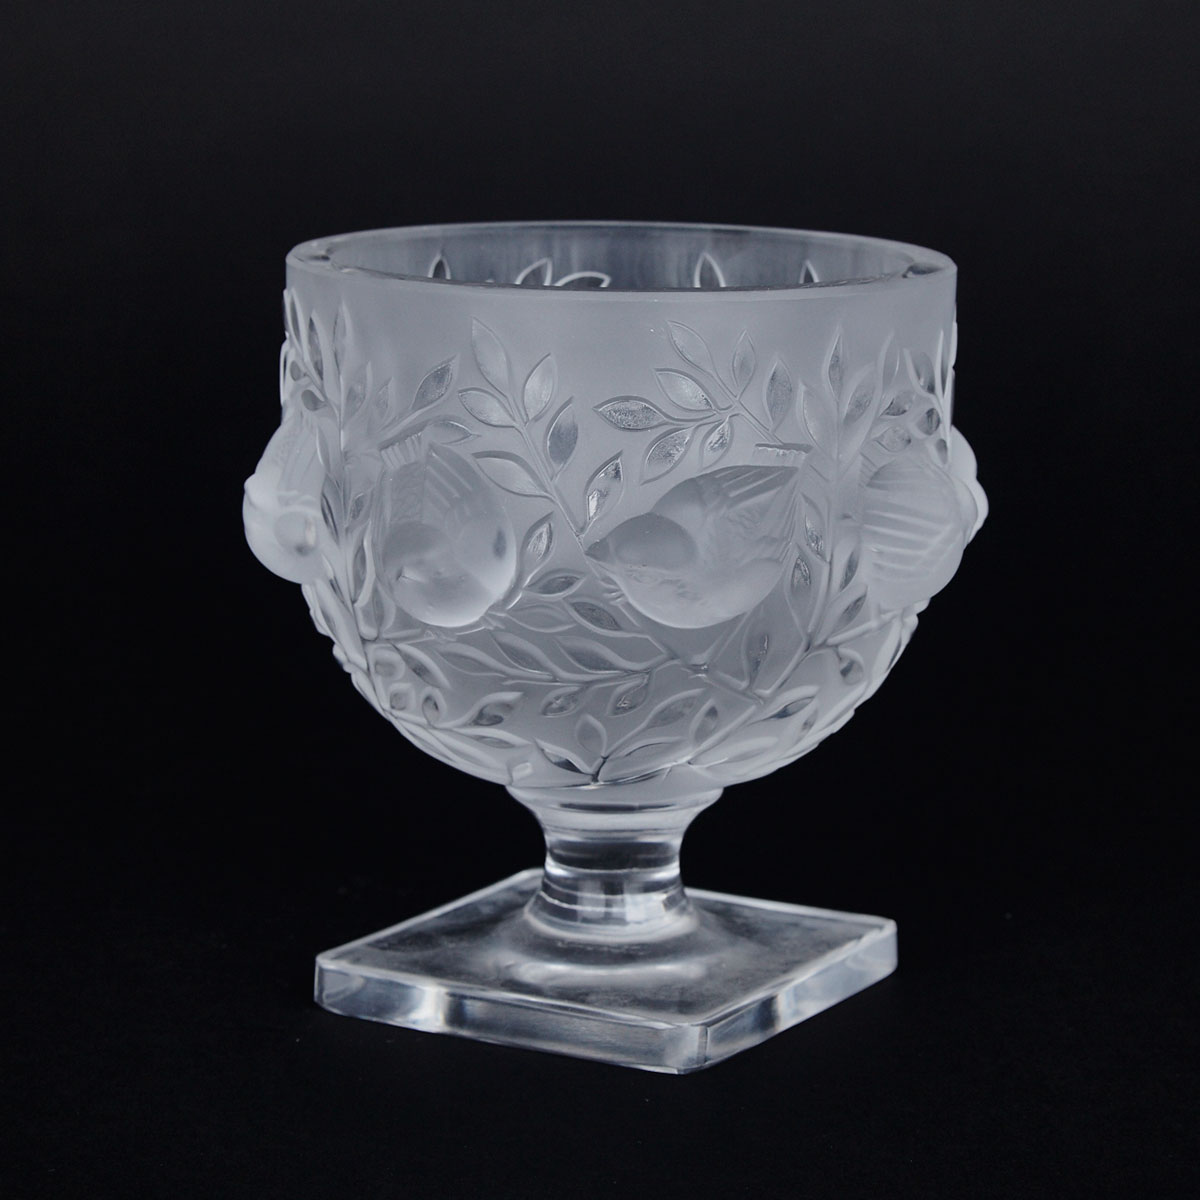 ‘Elizabeth’, Lalique Glass Footed Bowl, 20th century